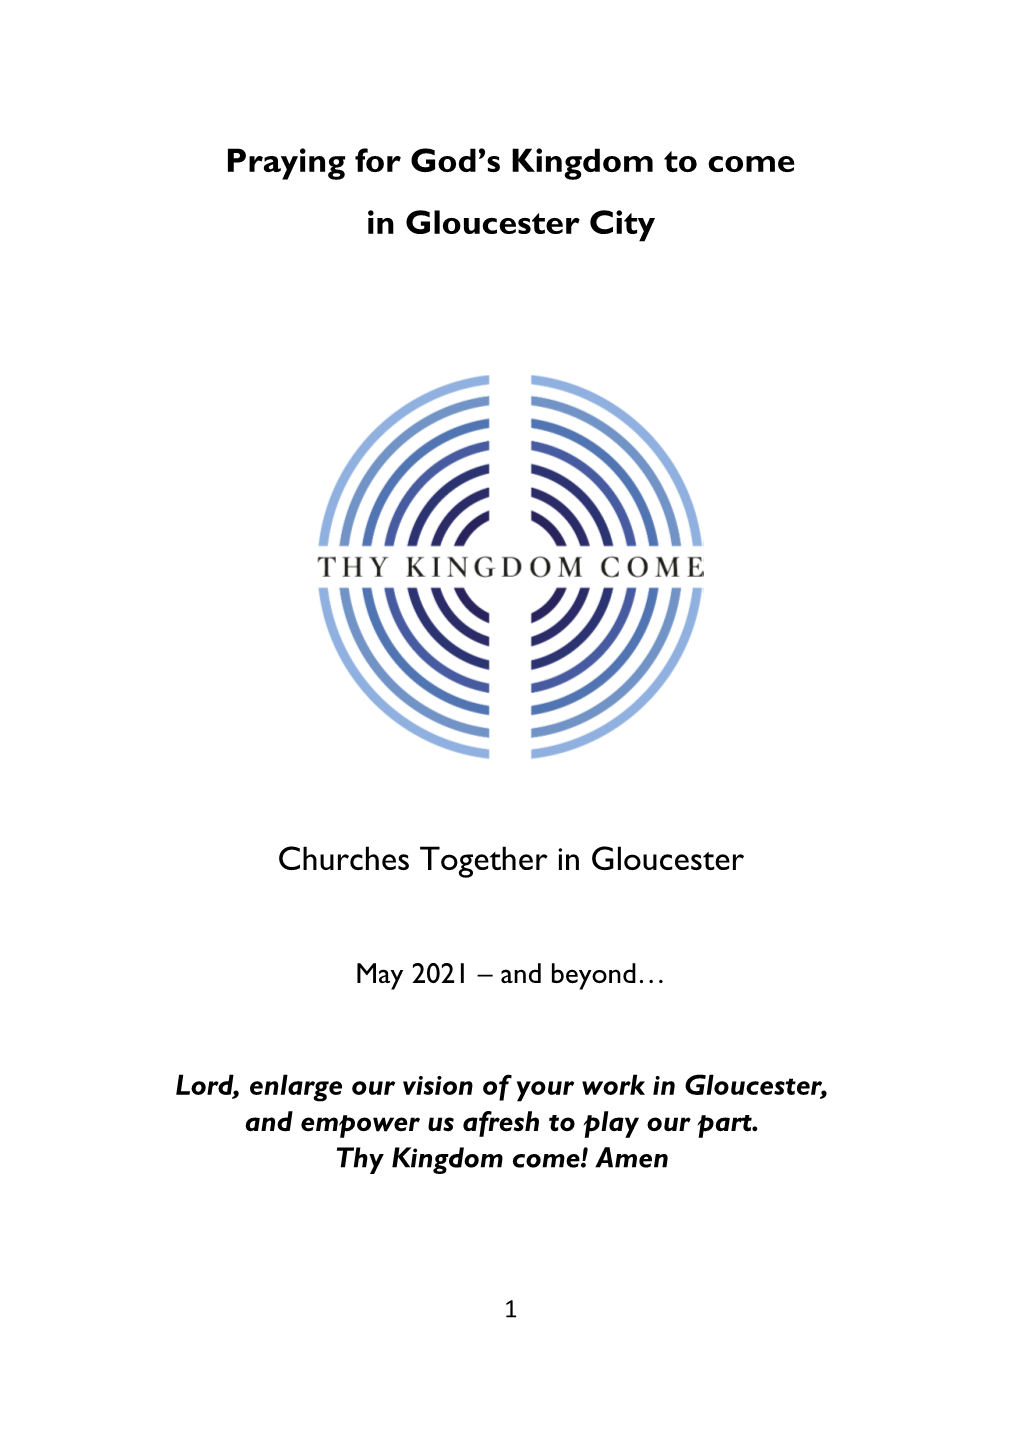 Praying for God's Kingdom to Come in Gloucester City Churches